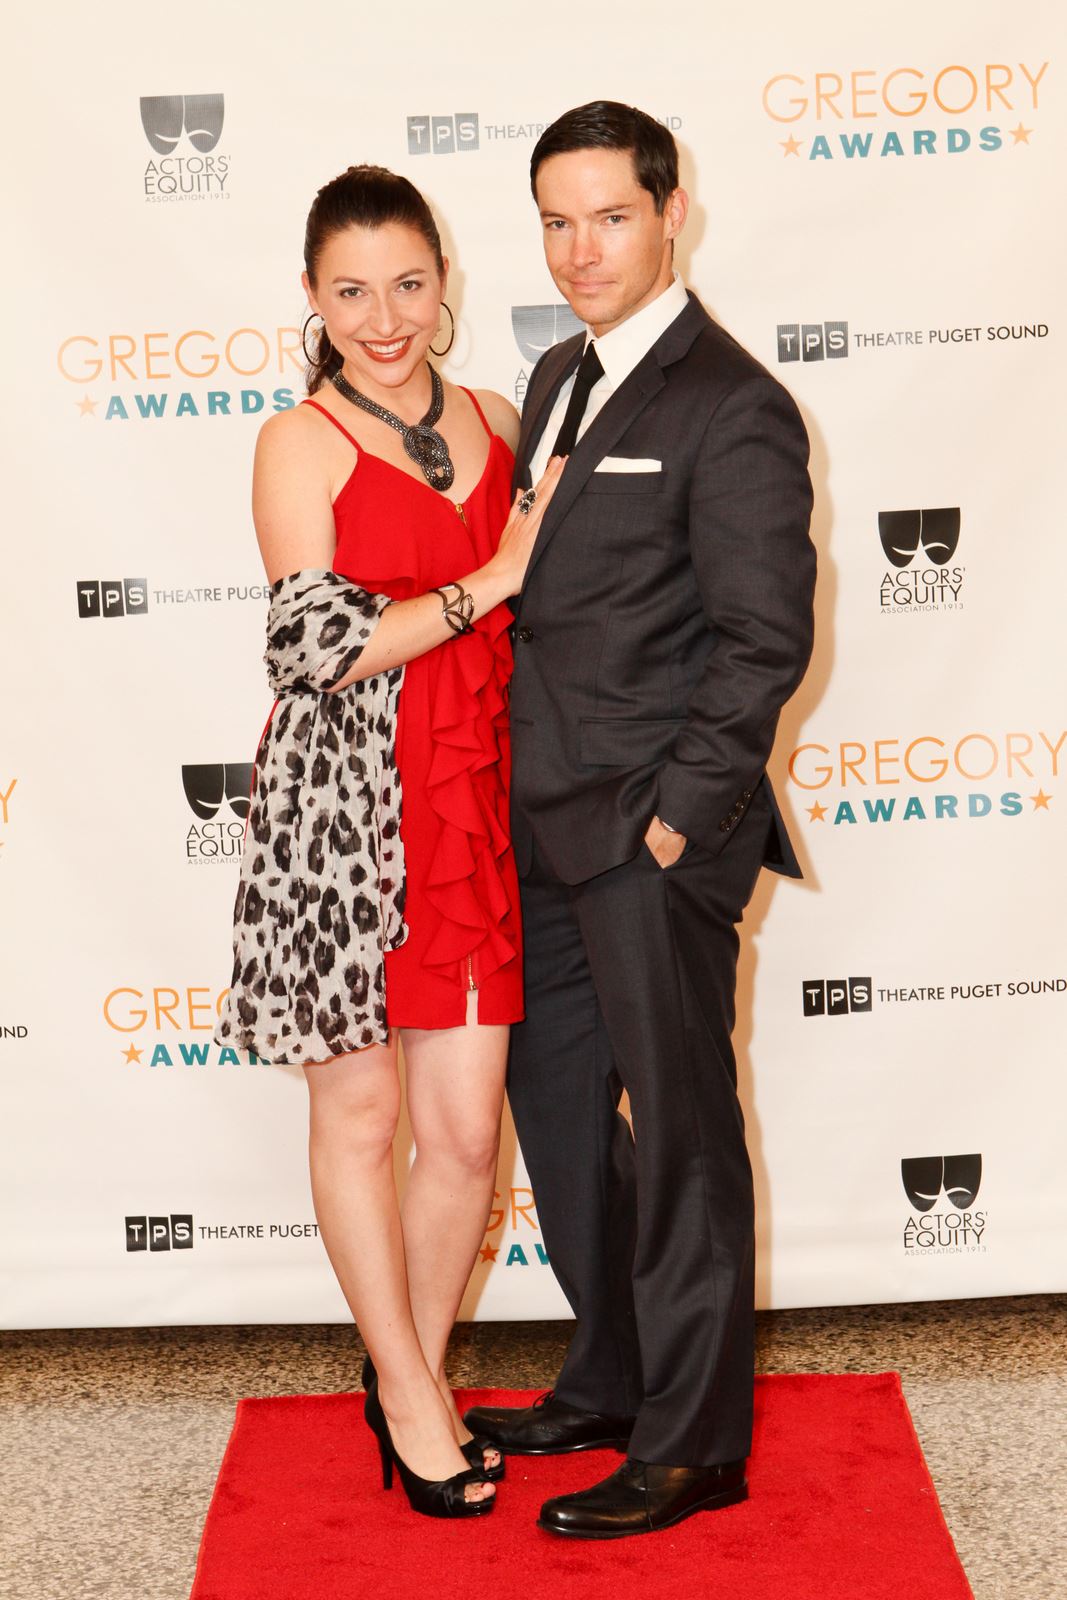 Gregory Awards 2012. Nominated three years in a row (2010-2012)